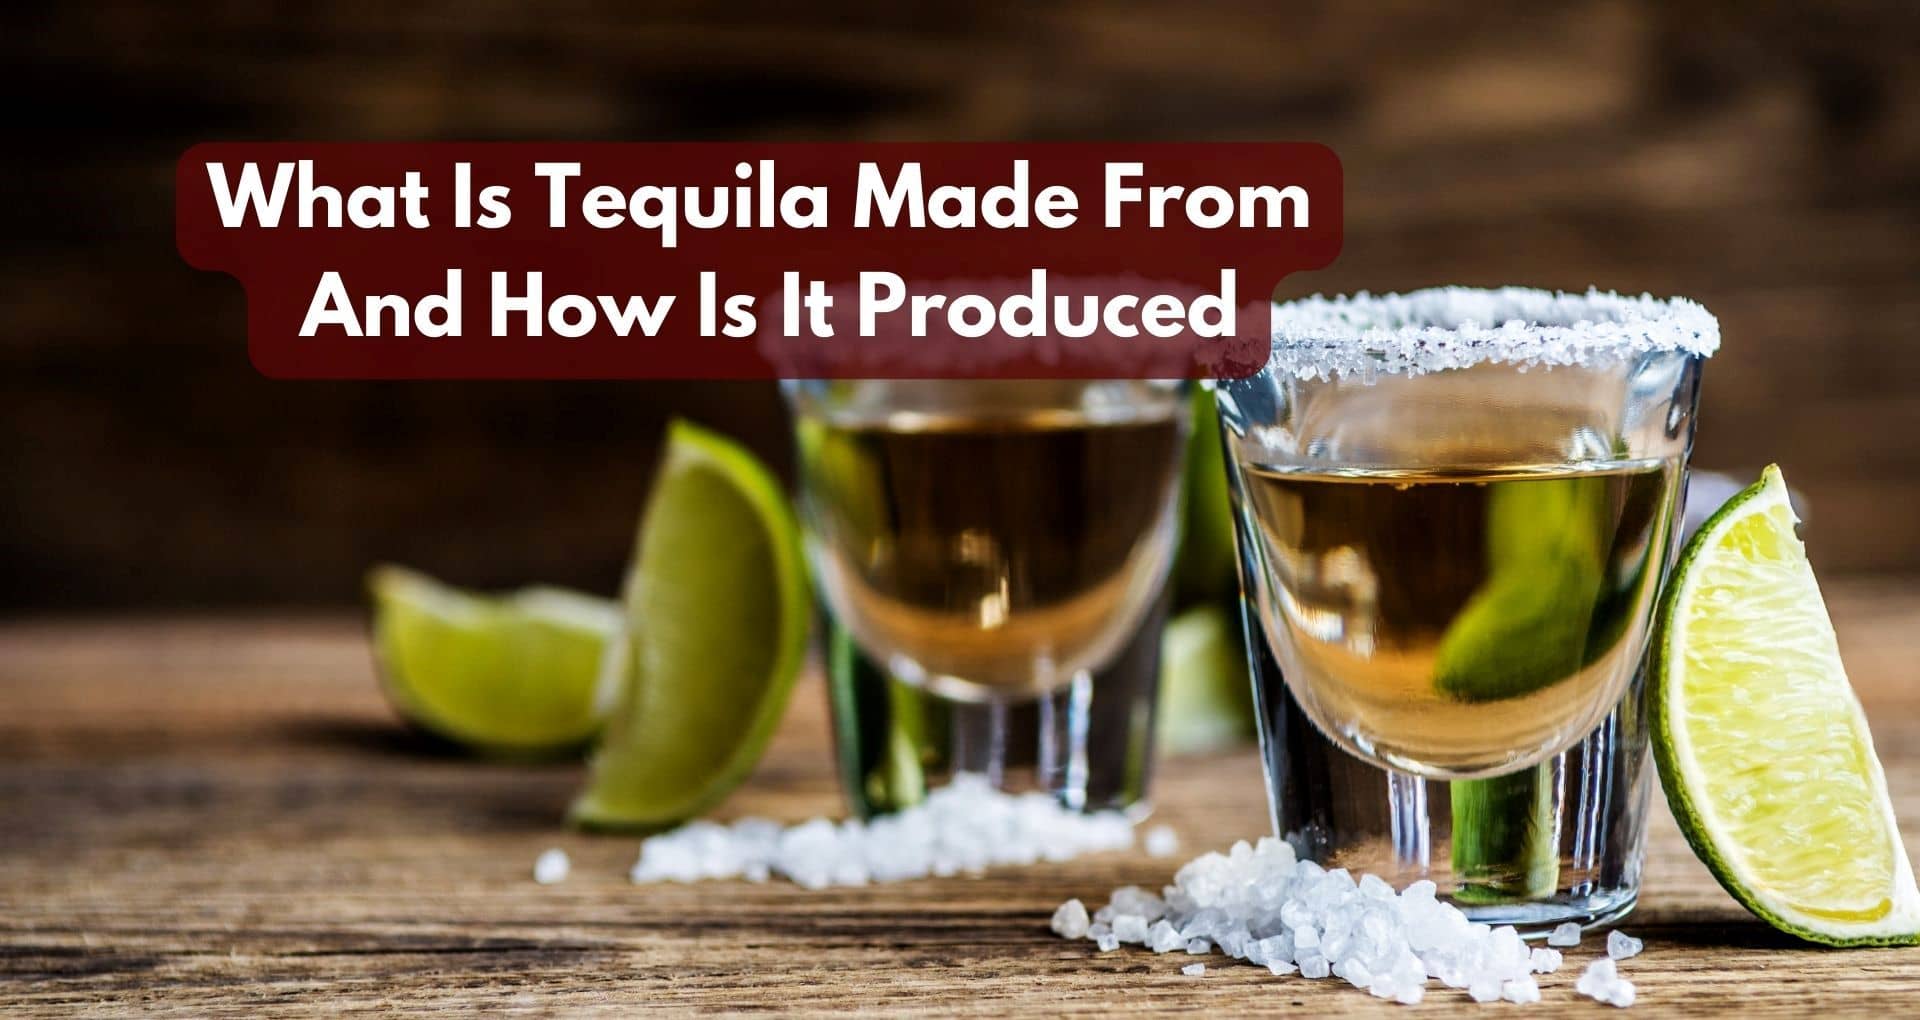 What Is Tequila Made From And How Is It Produced